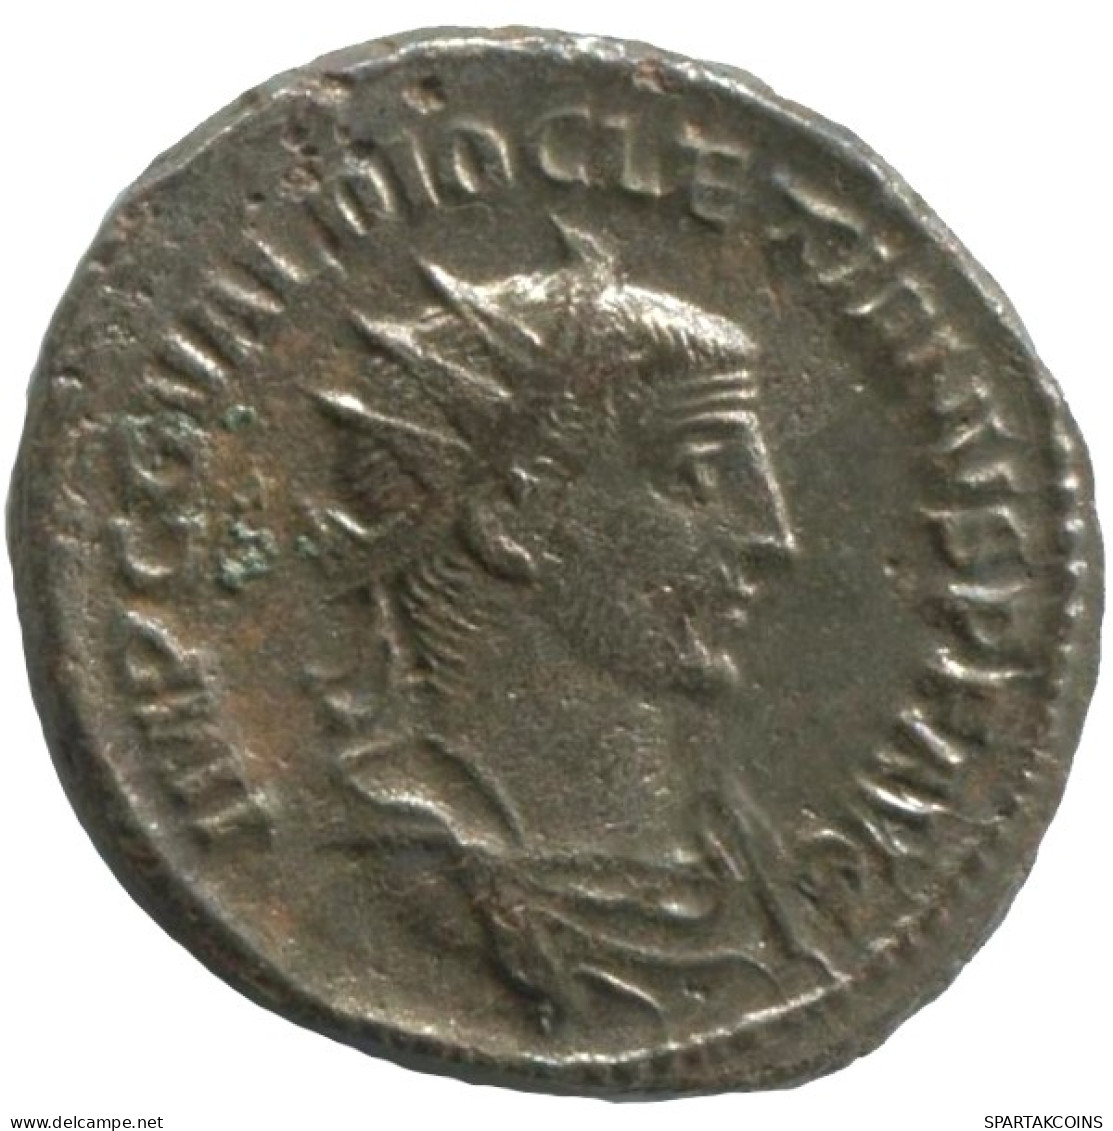 DIOCLETIAN ANTONINIANUS Antioch (?/XXI) AD287 IOVICONSERVATORI. #ANT1917.48.E.A - The Tetrarchy (284 AD Tot 307 AD)